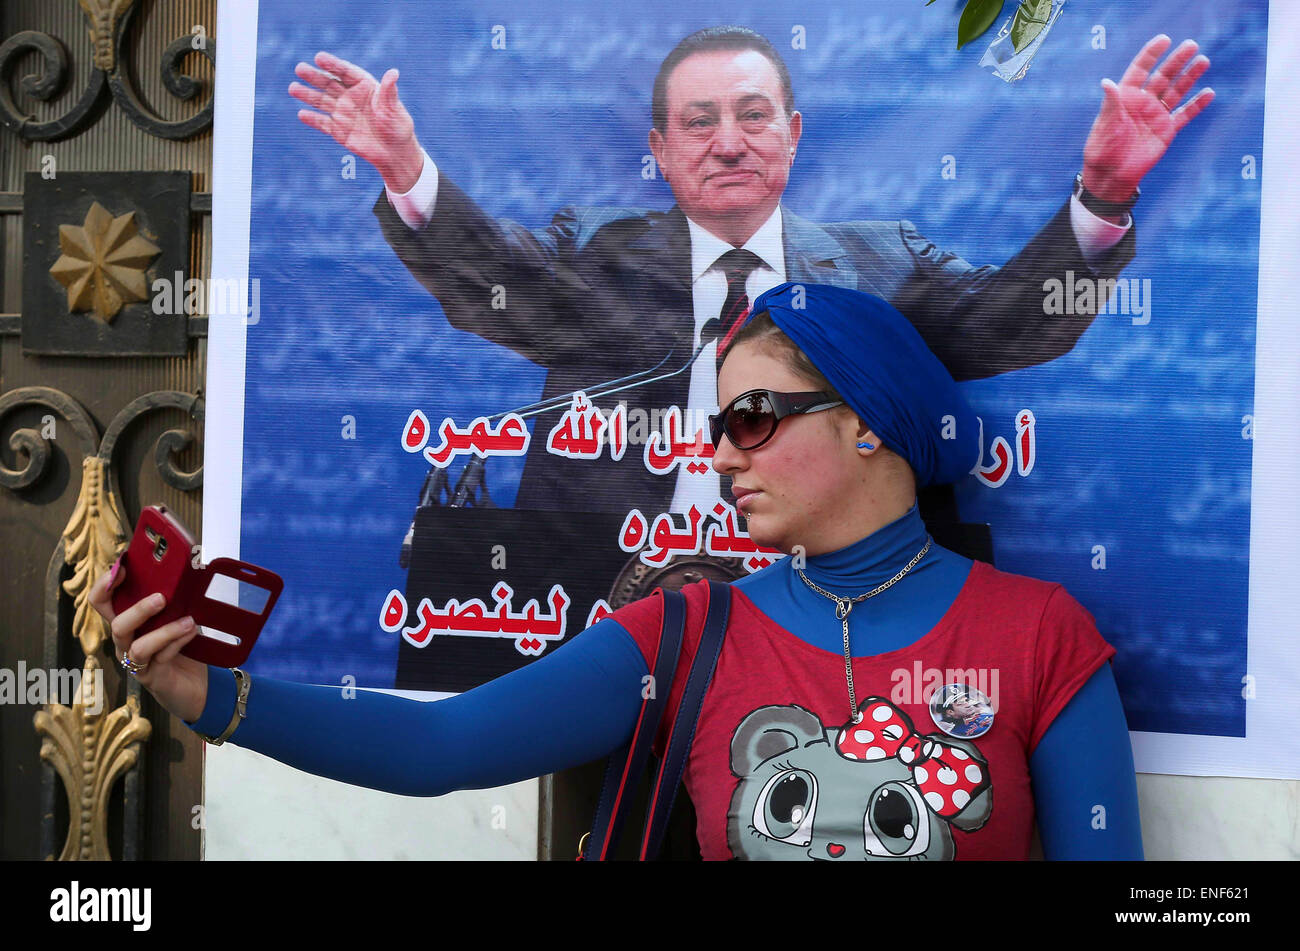 Cairo, Egypt. 4th May, 2015. An Egyptian supporter of former President Hosni Mubarak takes a selfie with his picture during a celebration to mark his 87th birthday, outside Maadi military hospital, near Cairo on May 4, 2015. An Egyptian legal authority on Monday ruled in favor of former President Hosni Mubarak by allowing him to retain his ''privileges'' as former president, a judicial source has said © Amr Sayed/APA Images/ZUMA Wire/Alamy Live News Stock Photo